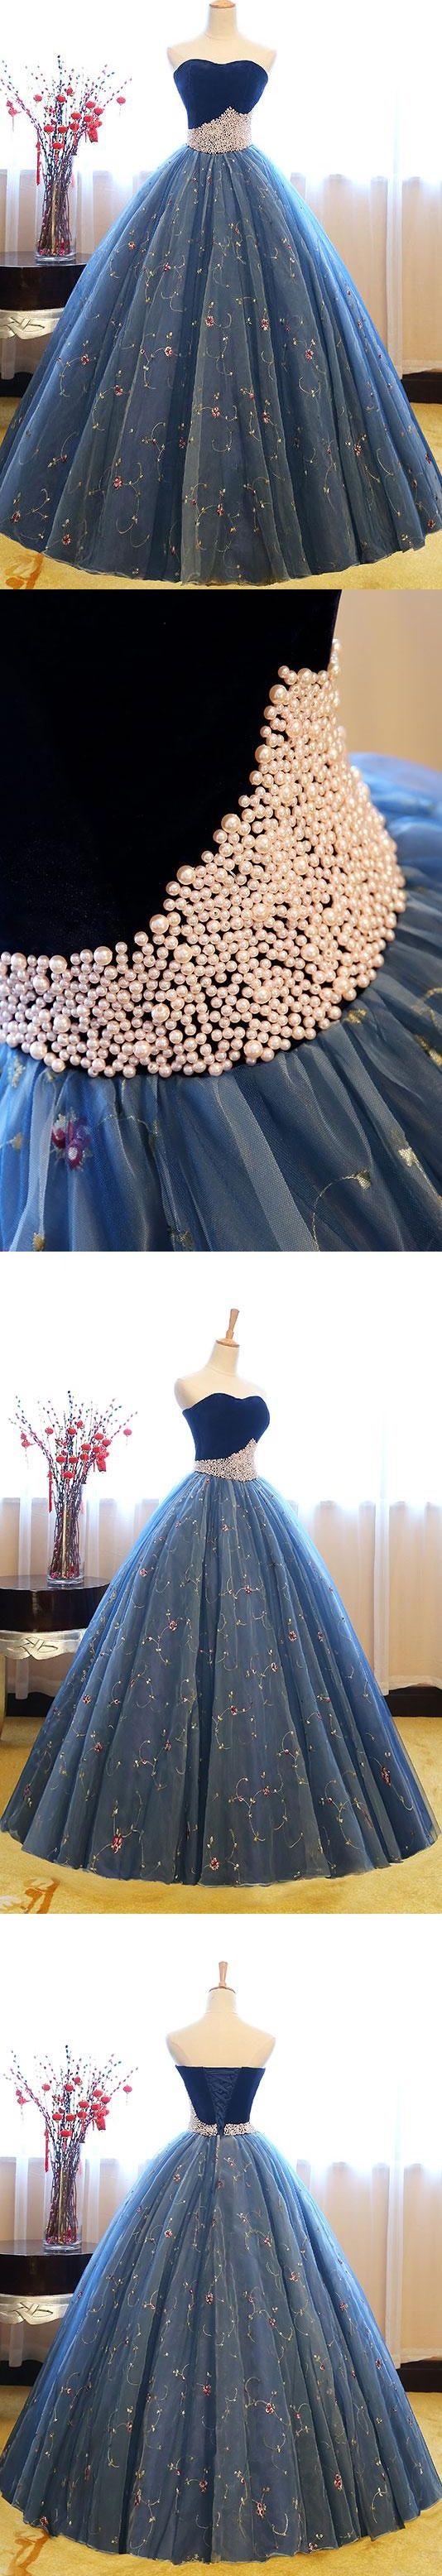 Ball Gown Prom Dresses Sweetheart Floor-length Beading Prom Dress Sexy Evening Dress